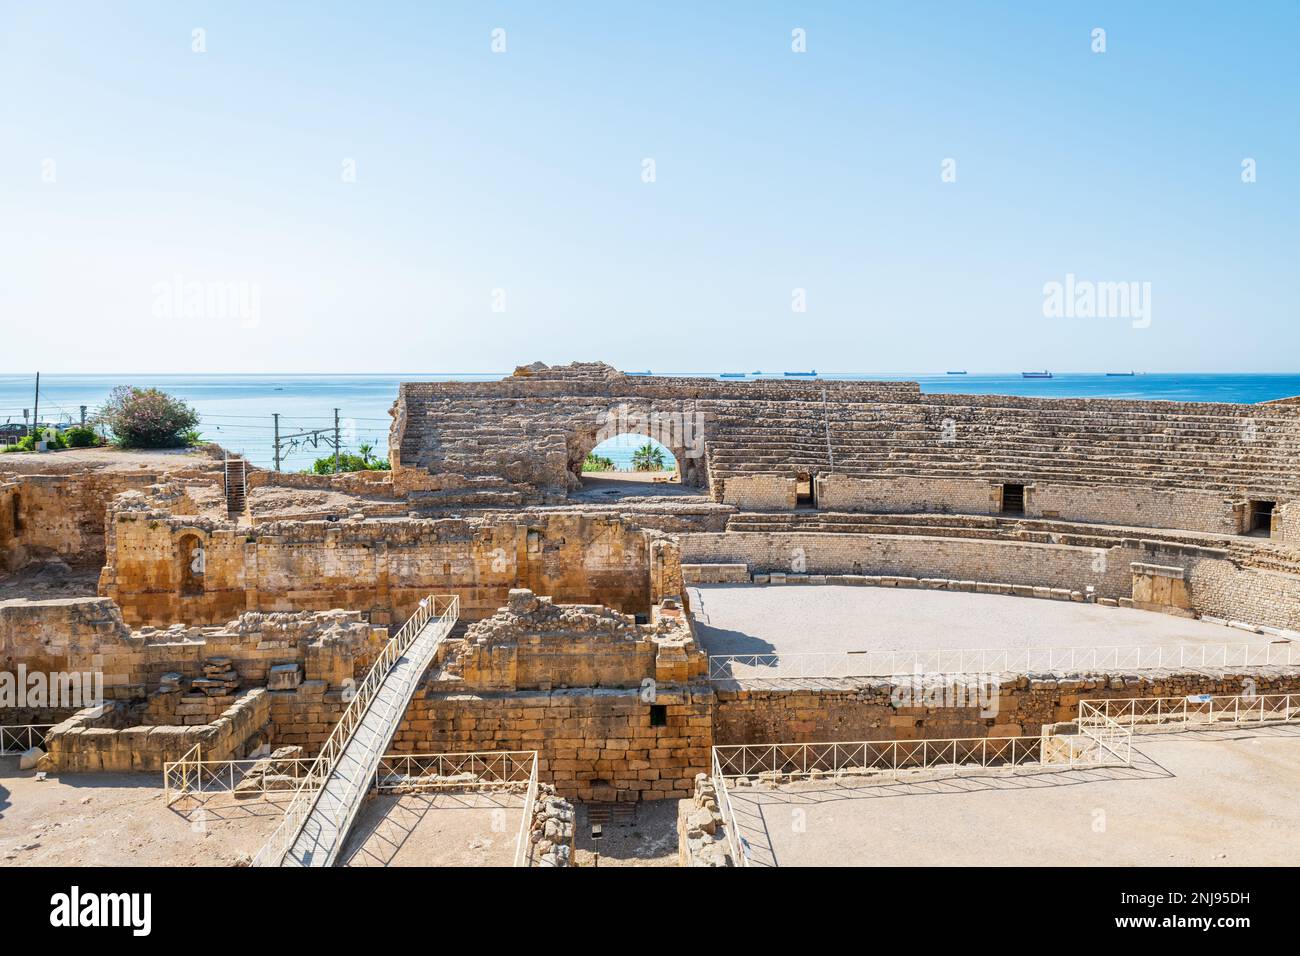 Wide-angle view of the ruins of the Roman amphitheater in Tarragona, built in the 2nd century AD, with the Mediterranean Sea in the background. Stock Photo